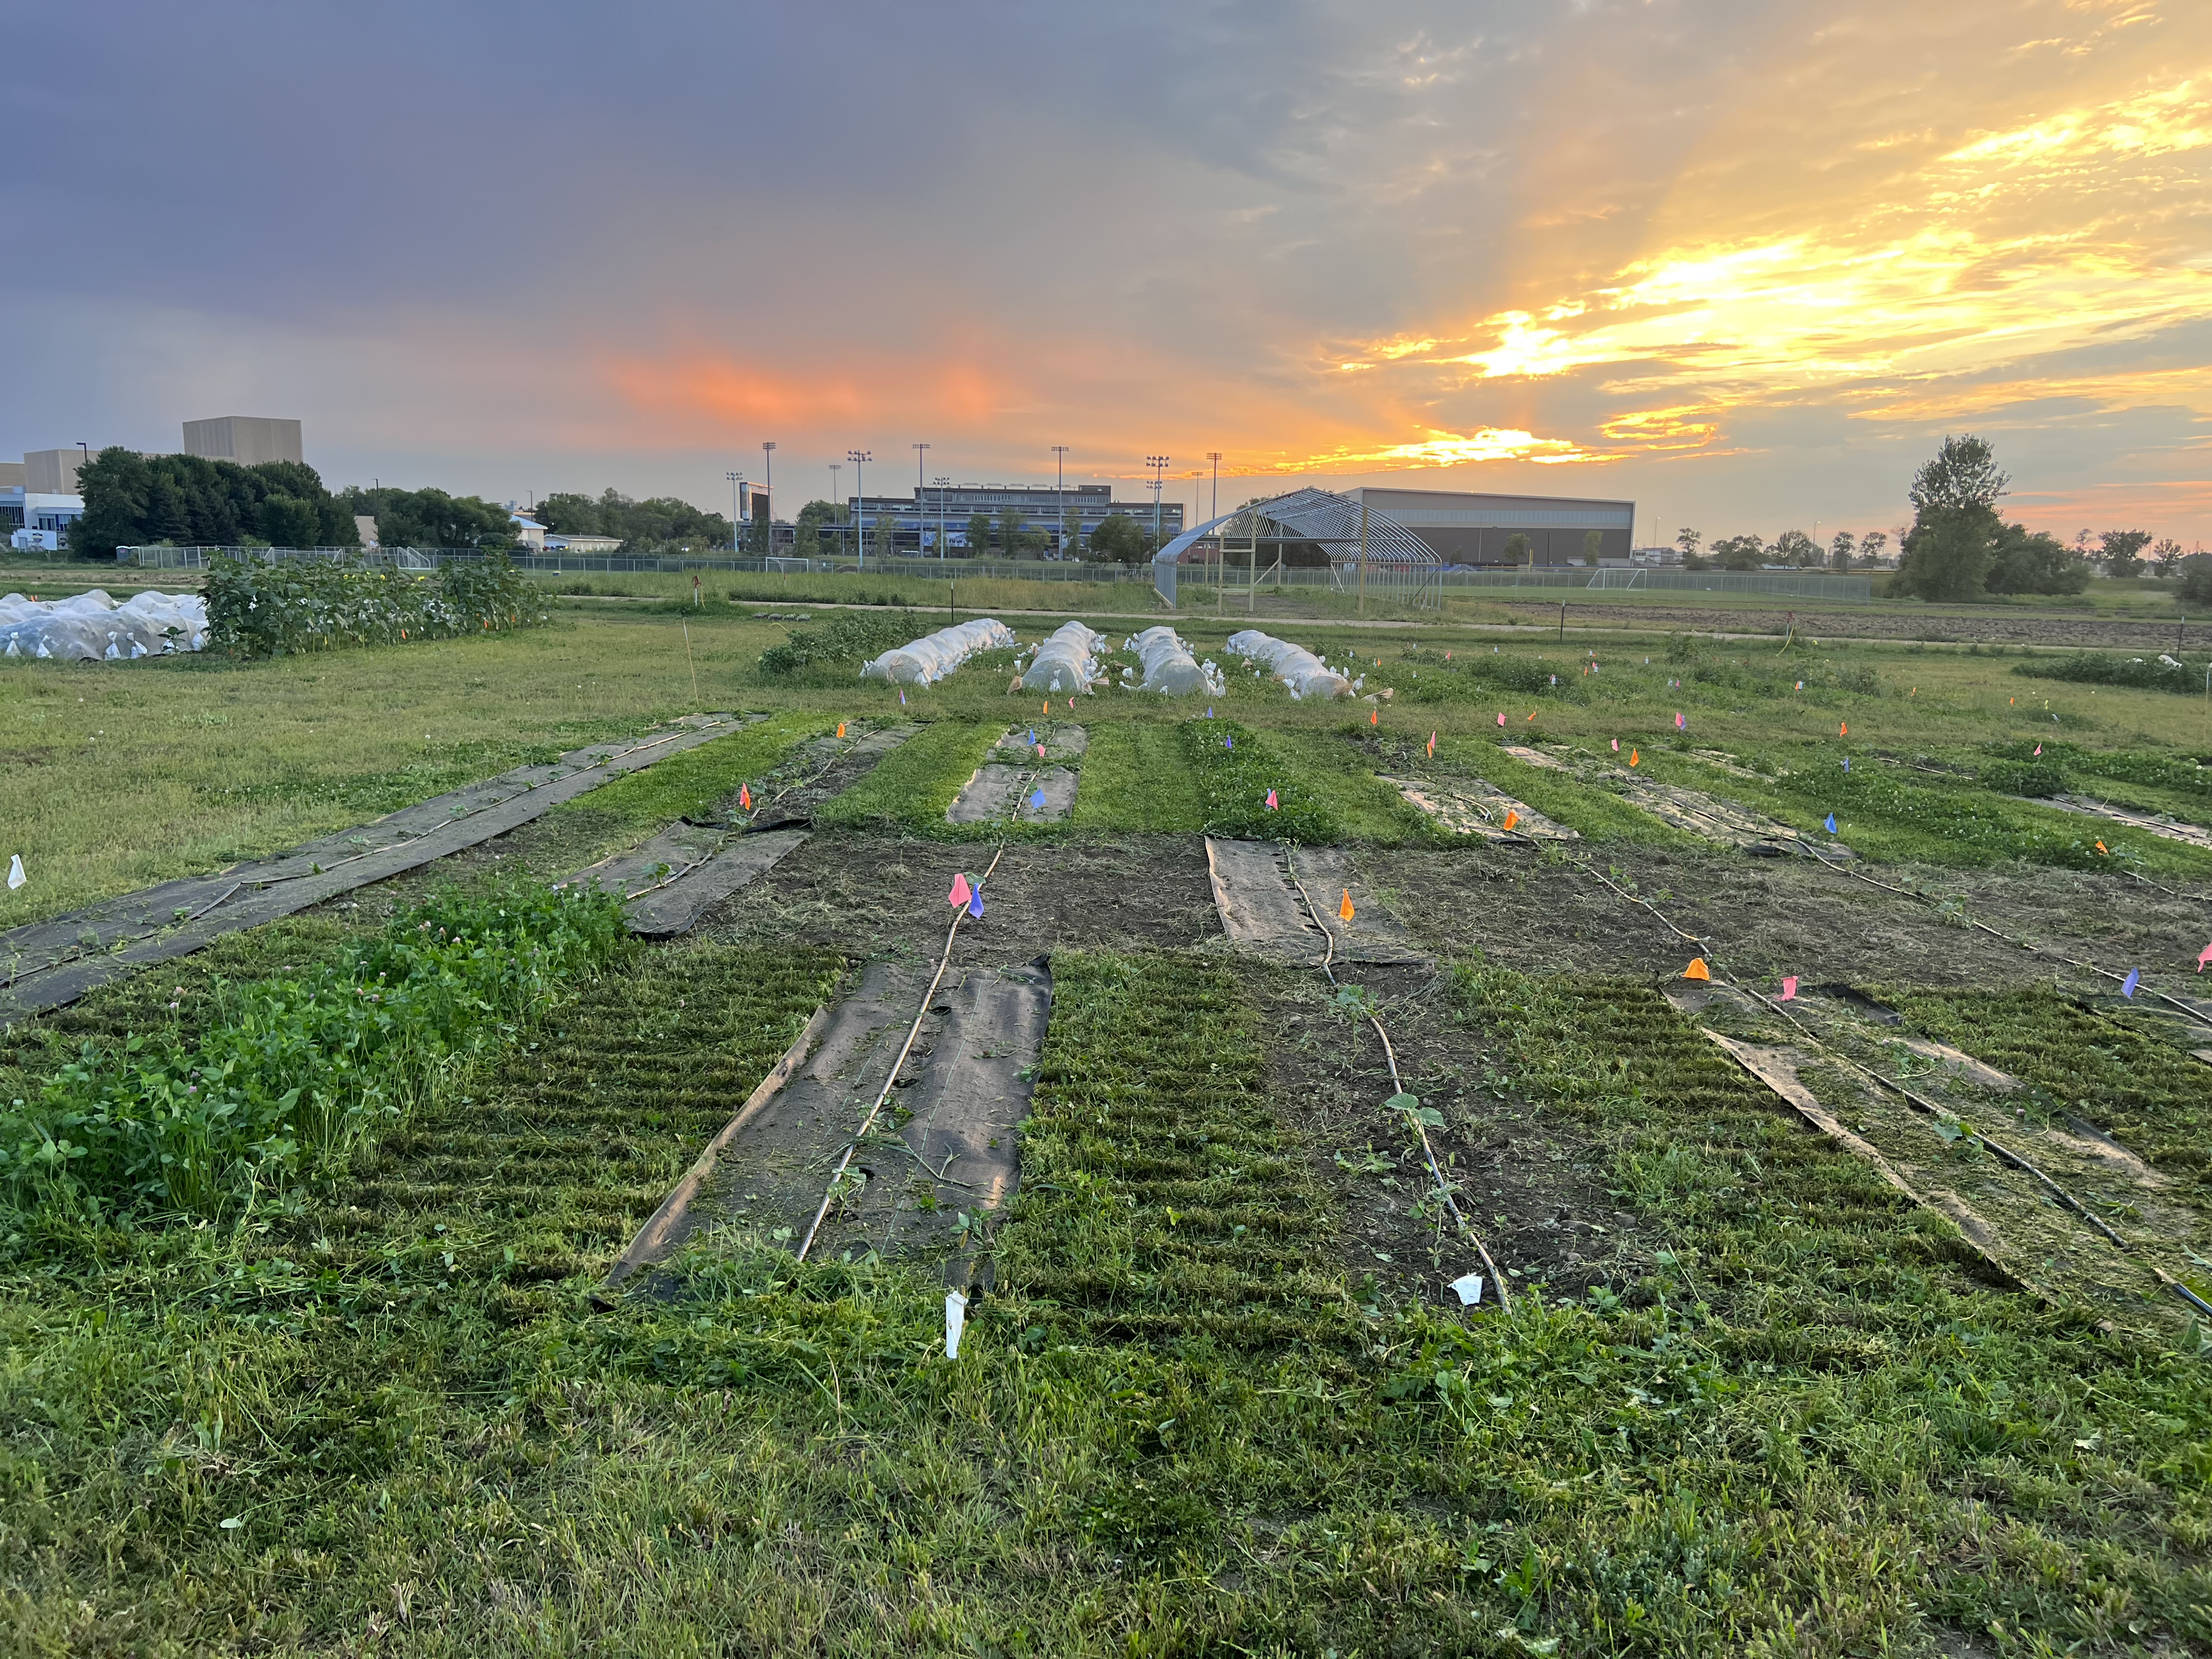 Clover pathways after being mowed with sunsetting in the background.